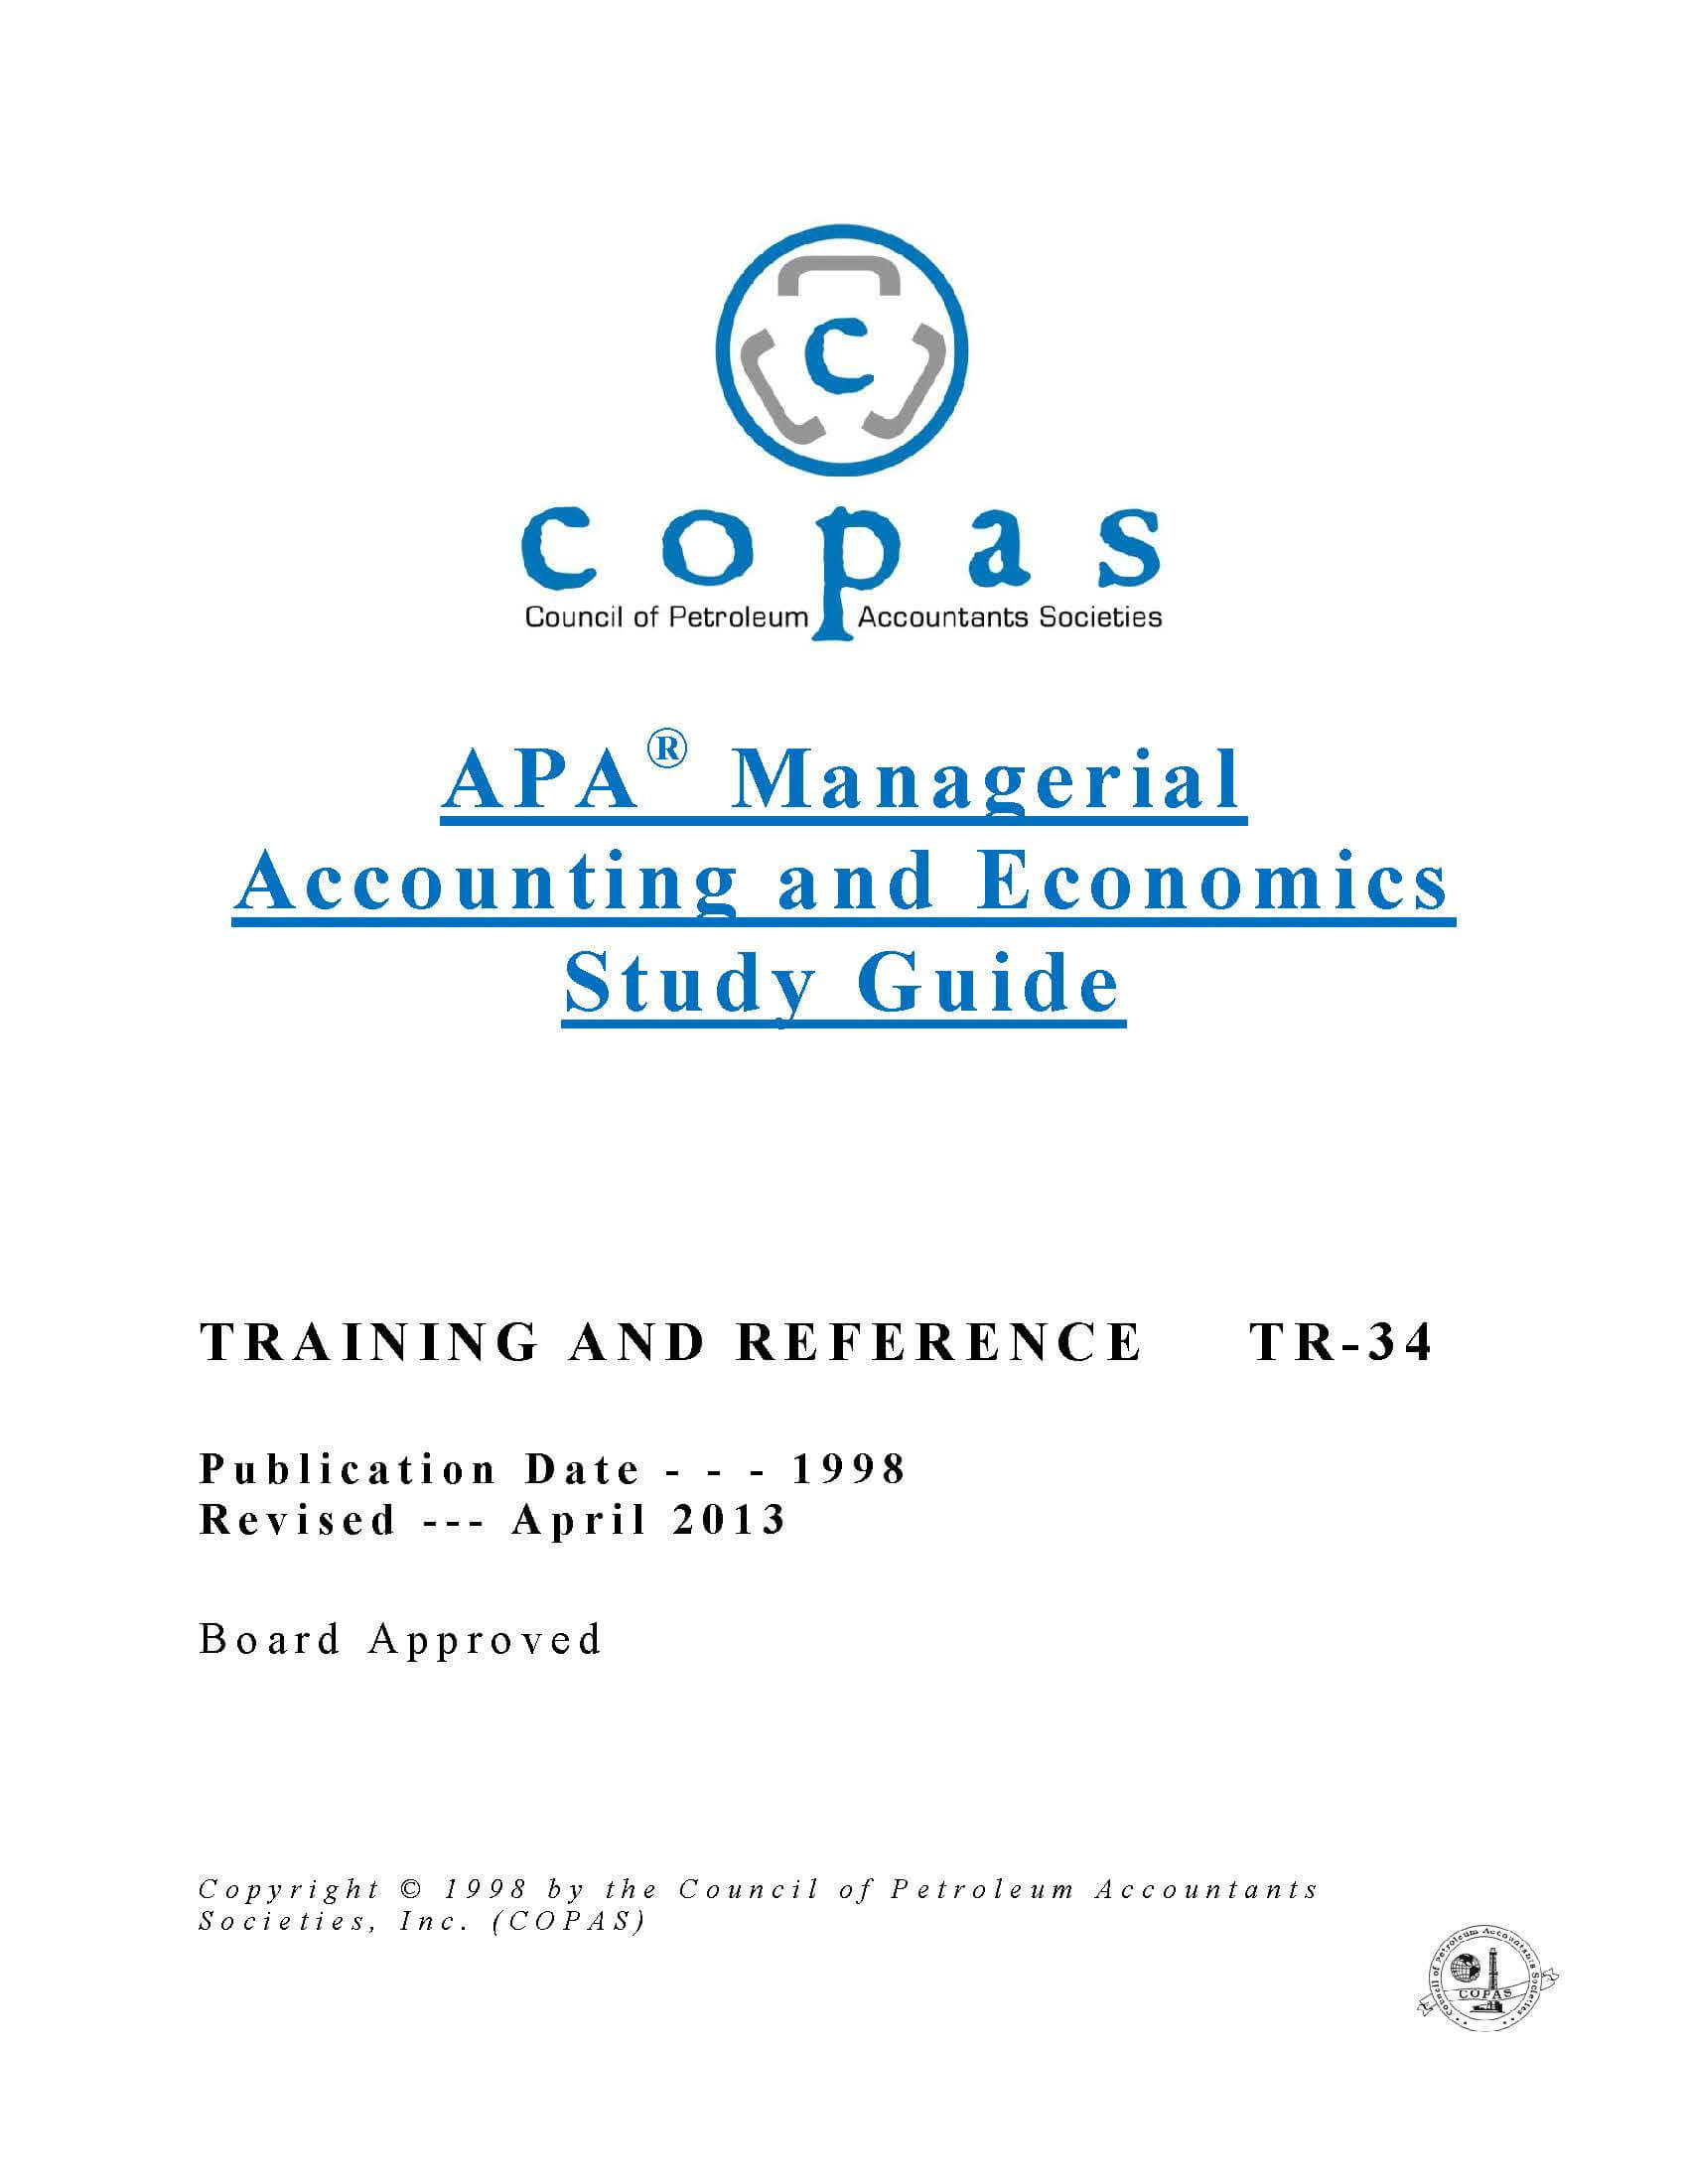 TR-34  APA®  Managerial Accounting and Economics Study Guide